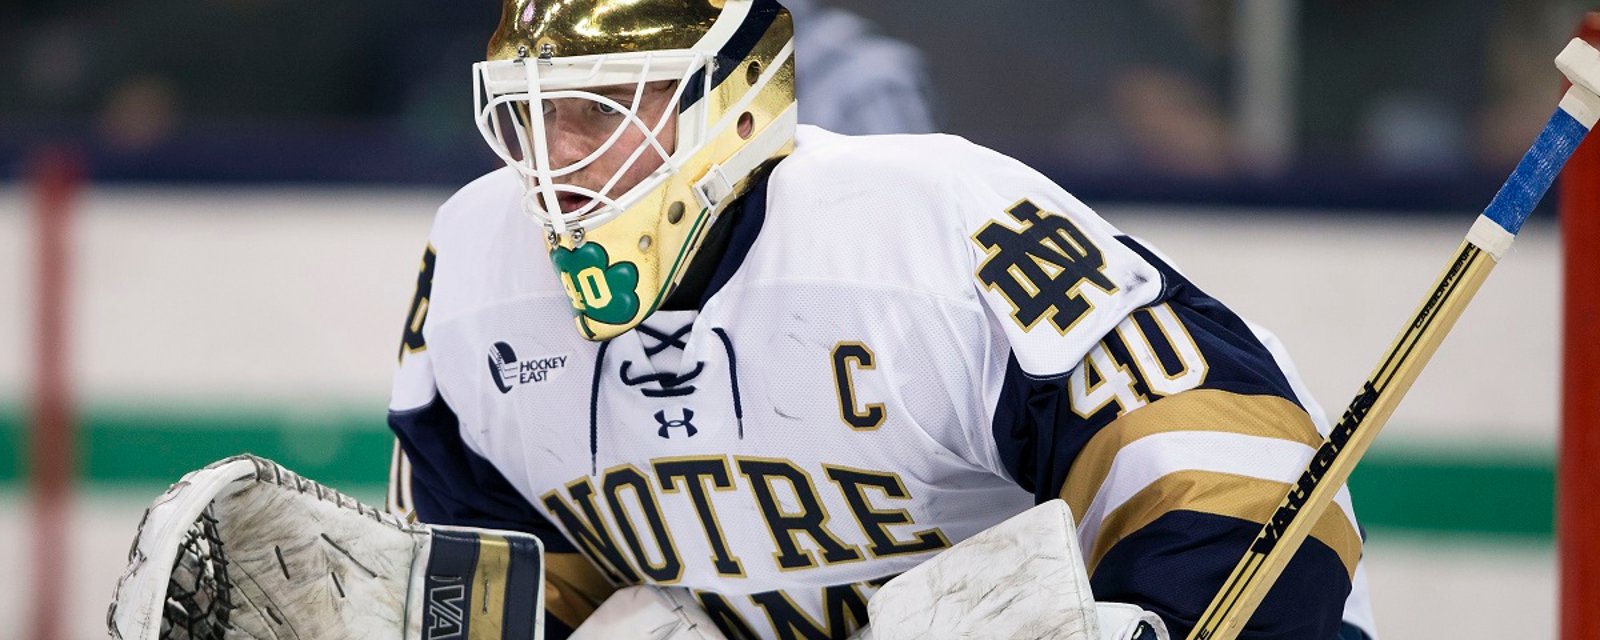 Top goaltending prospect will not sign with his team, soon to be free-agent.